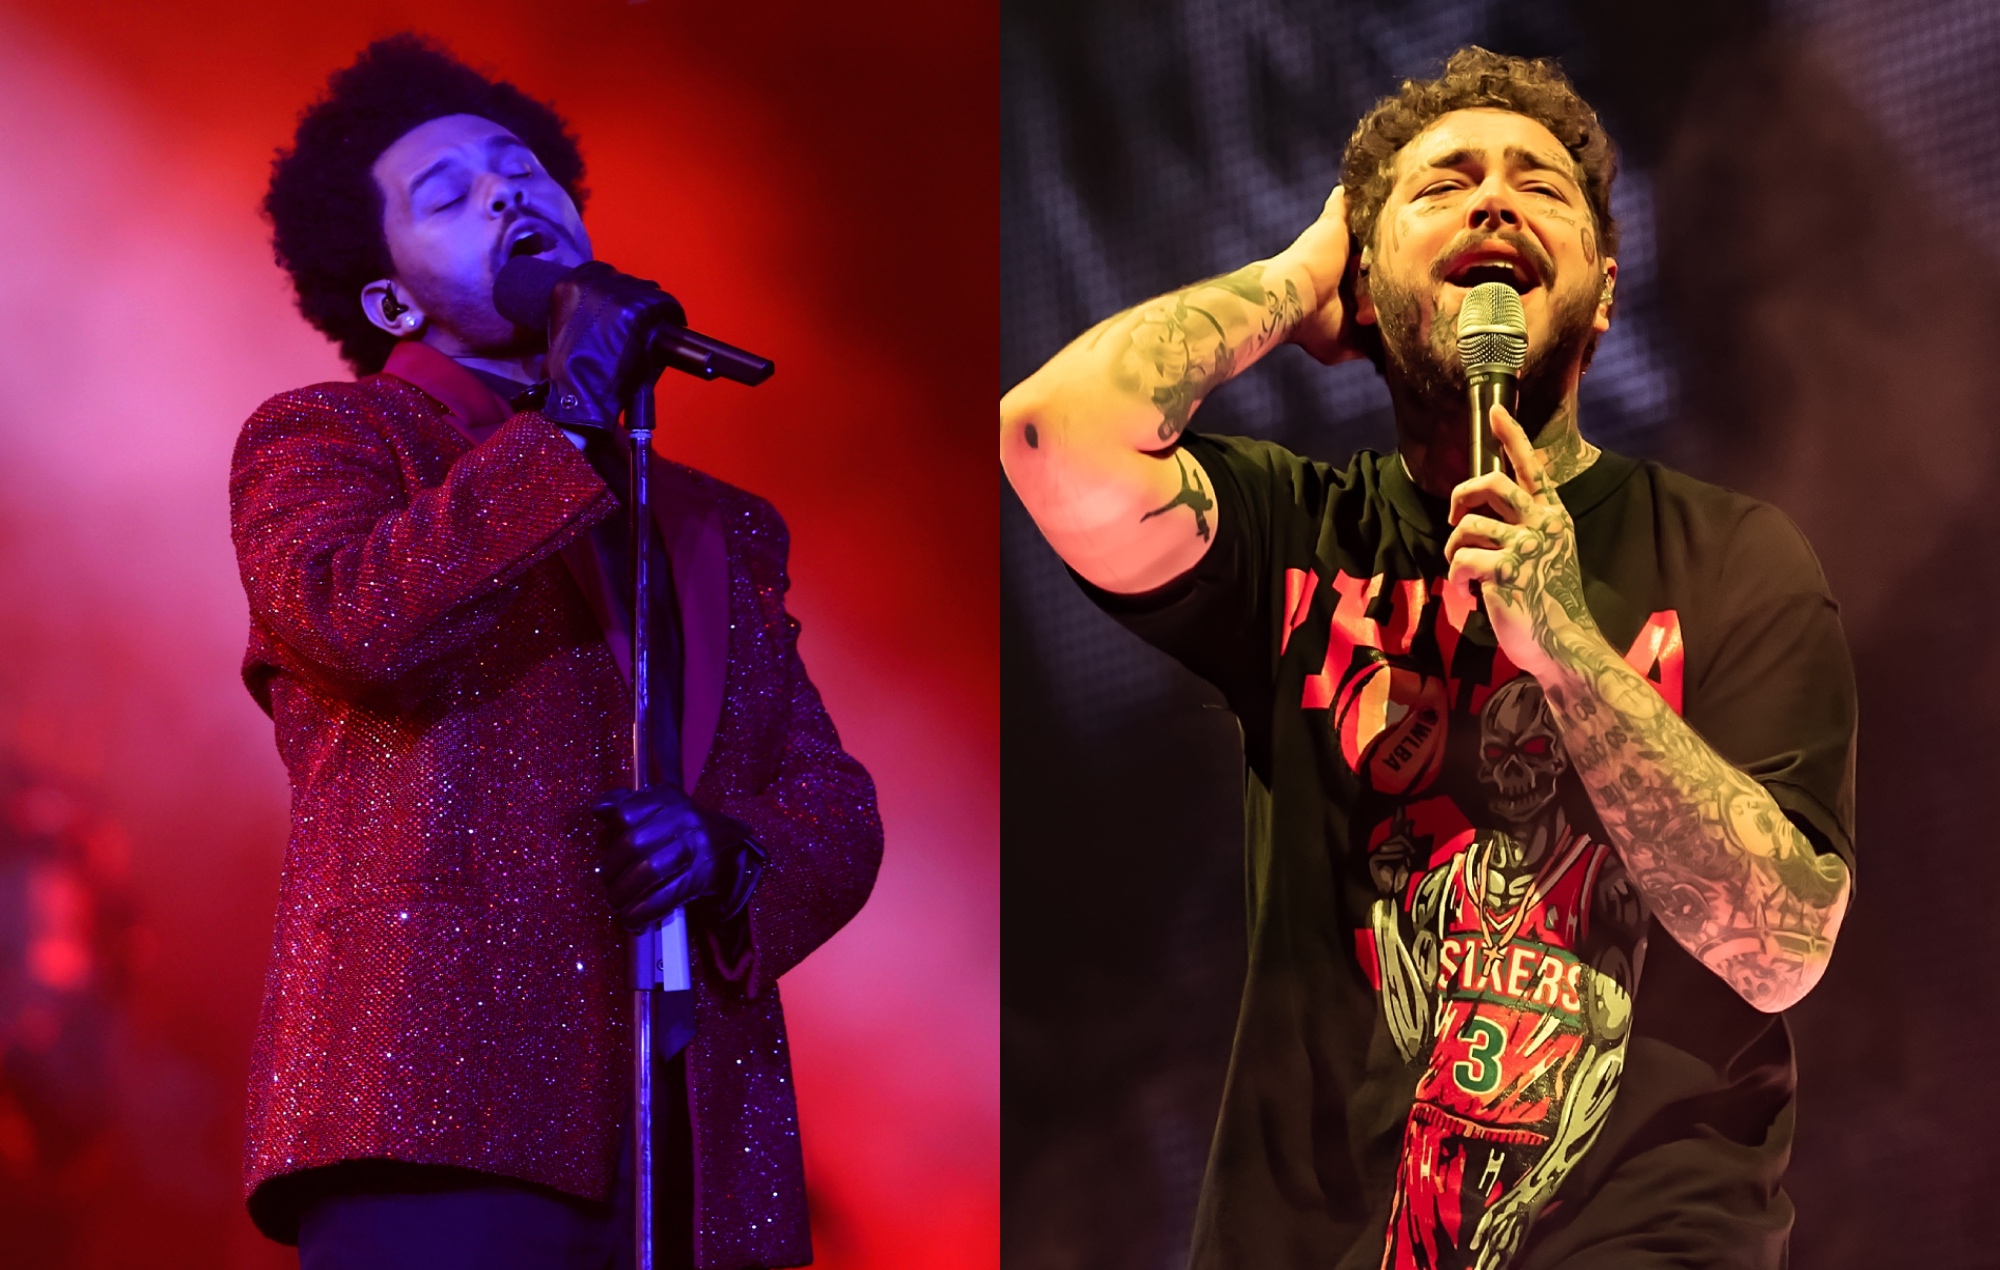 Post malone now. Post Malone the Weeknd. One right Now Post Malone the Weeknd. Концерт Post Malone зал. Post Malone 2015.